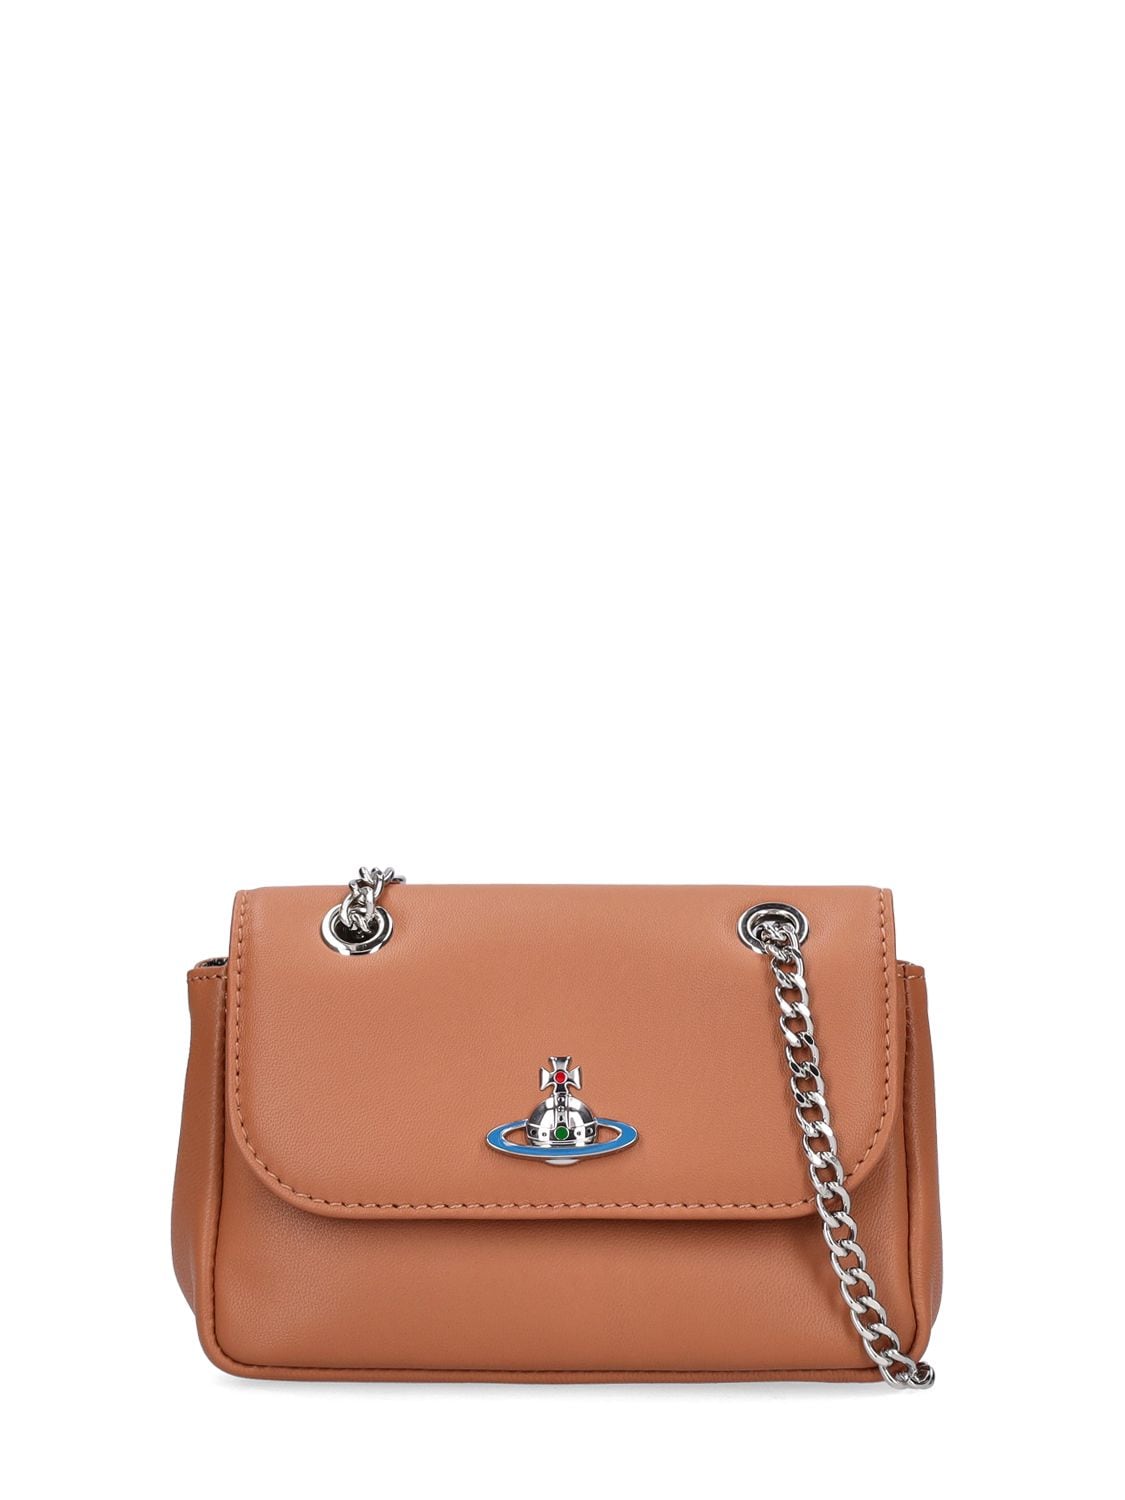 Vivienne Westwood Small Nappa Leather Shoulder Bag In Tan | ModeSens